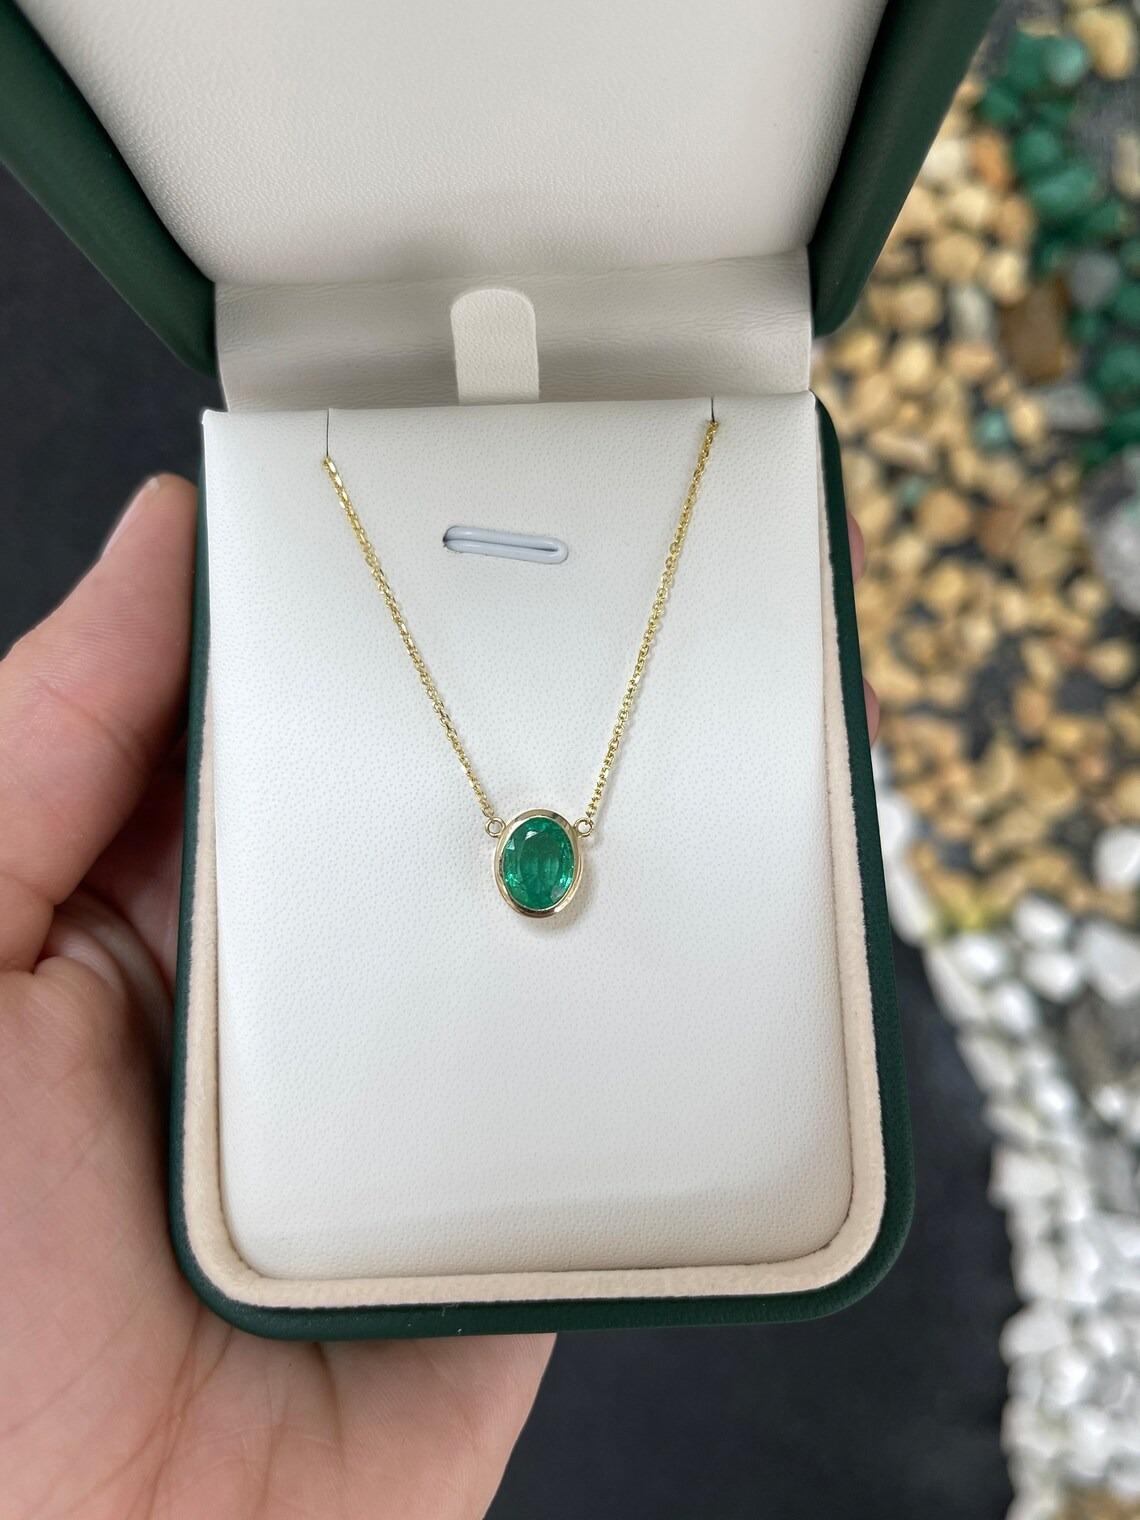 This stunning emerald necklace features a beautiful oval-cut emerald with a vivid medium green hue. The emerald is securely bezel set in a 14k gold solitaire pendant that measures 18 inches in length. The pendant is attached to a thin cable chain,